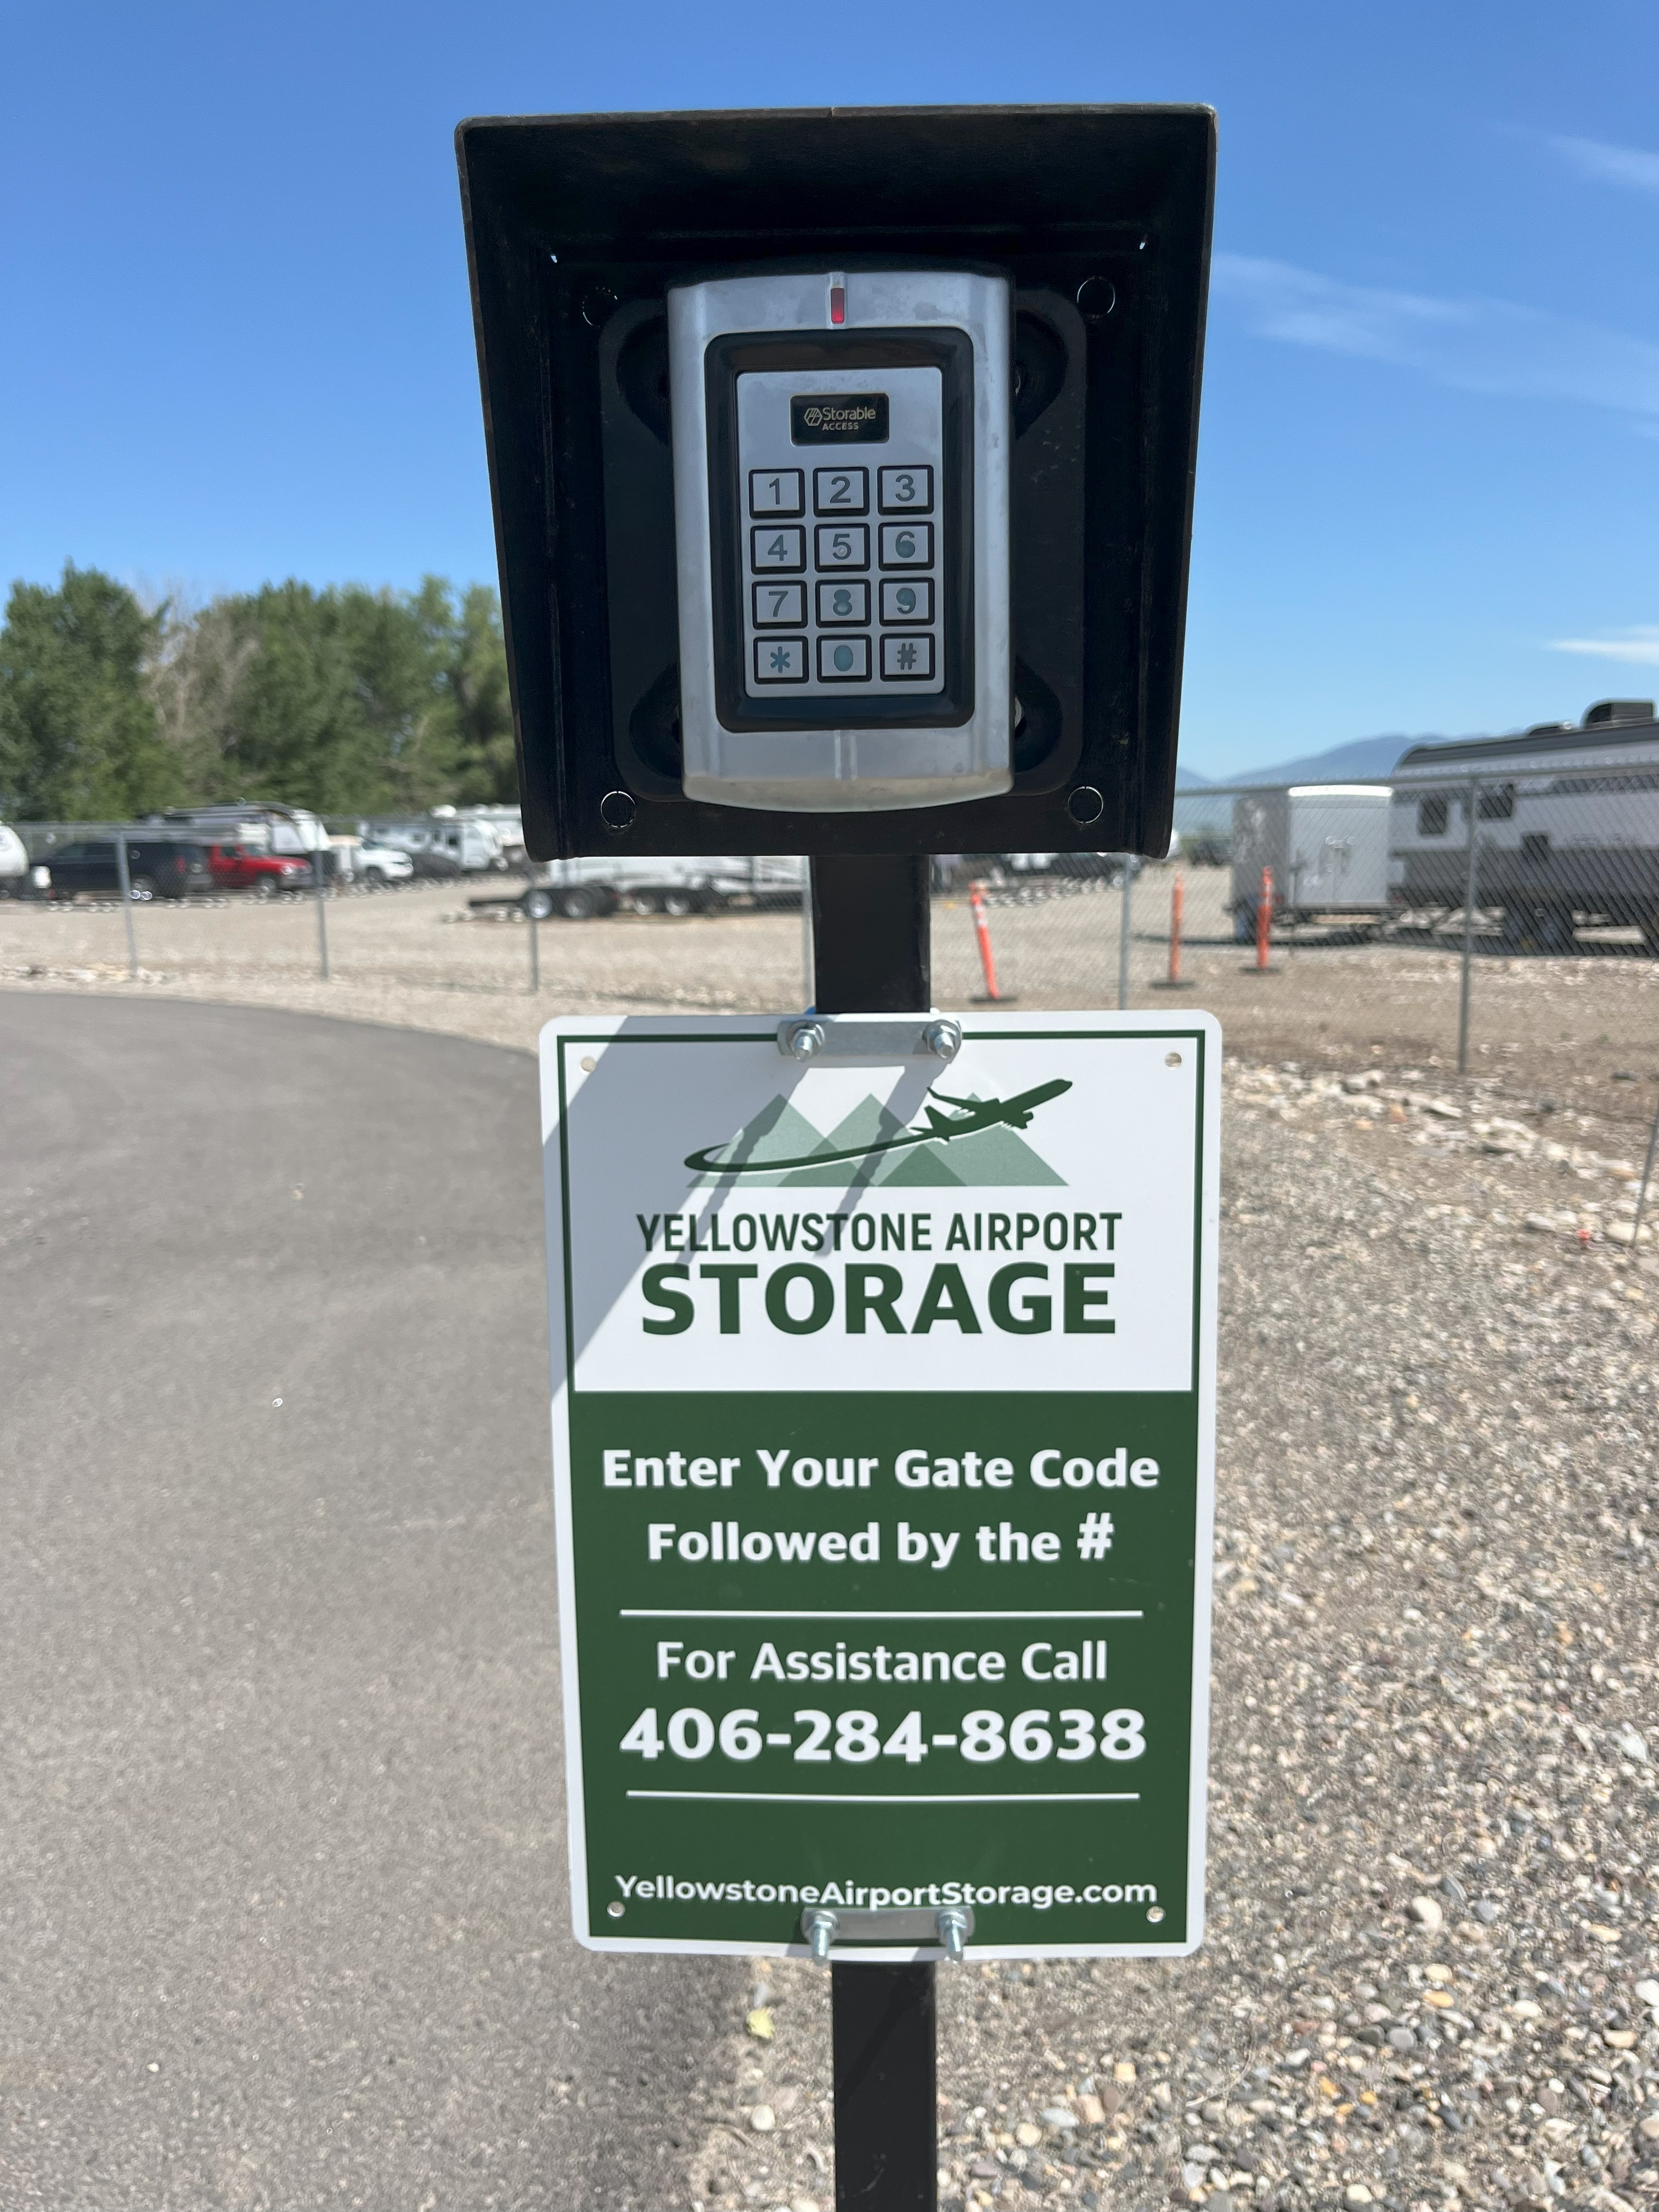 yellowstone airport storage keypad for gate entry